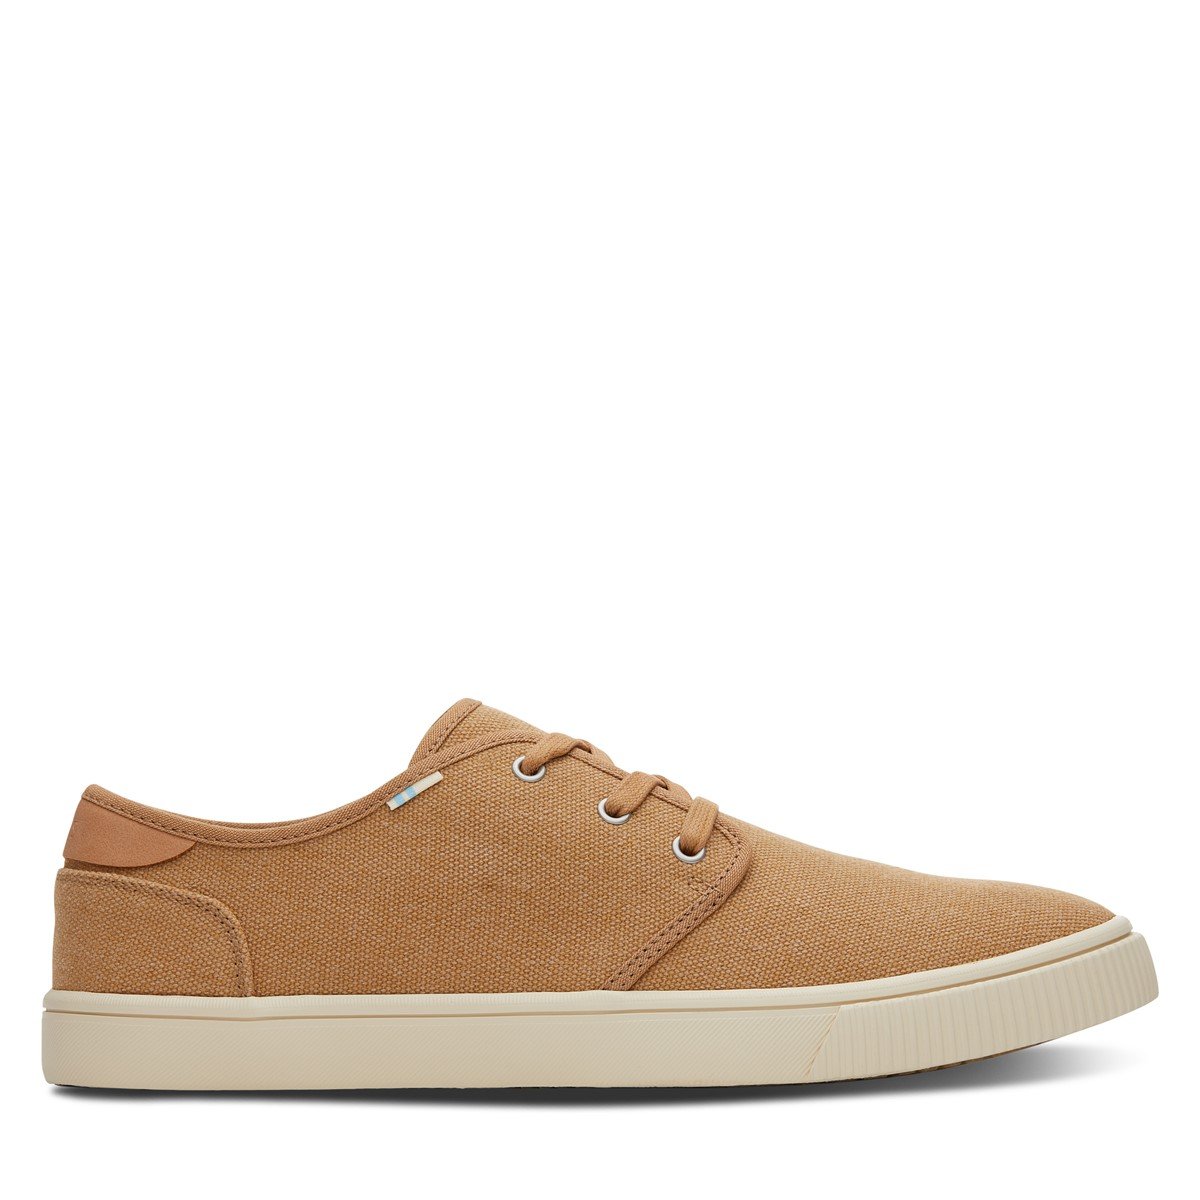 Men's Carlo Shoes in Light Brown